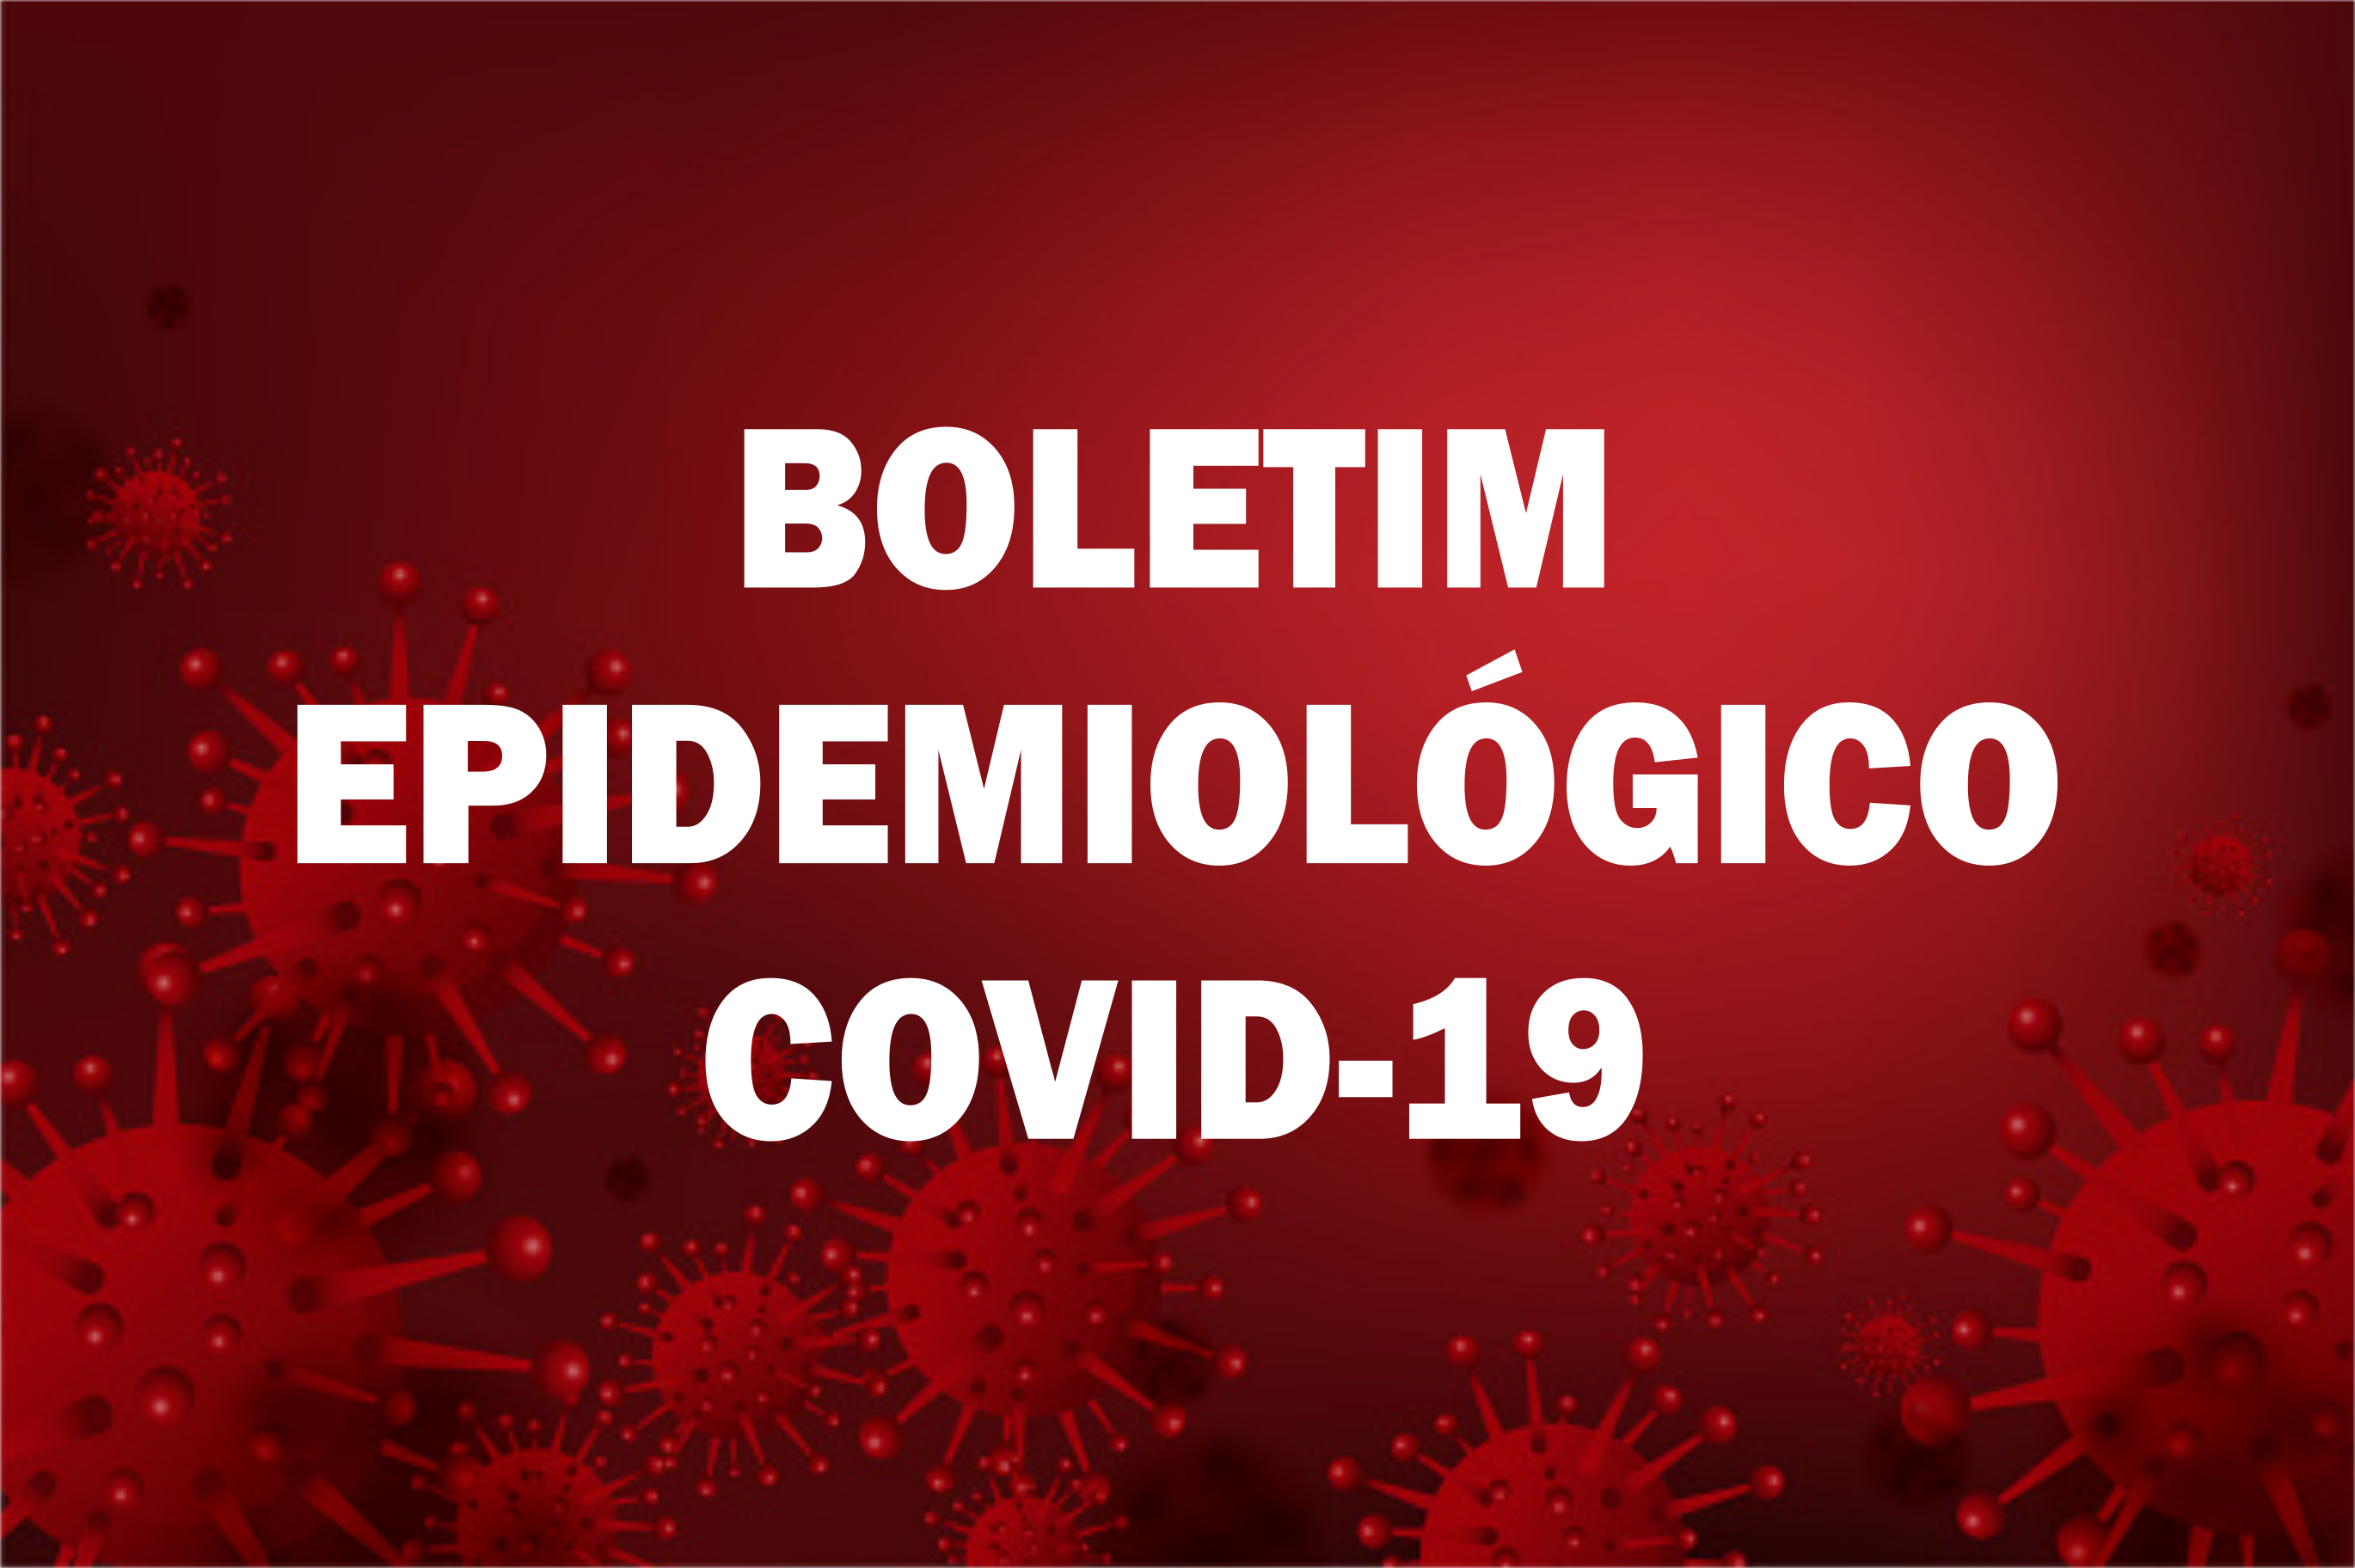 You are currently viewing BOLETIM EPIDEMIOLÓGICO Nº 137 (COVID-19)